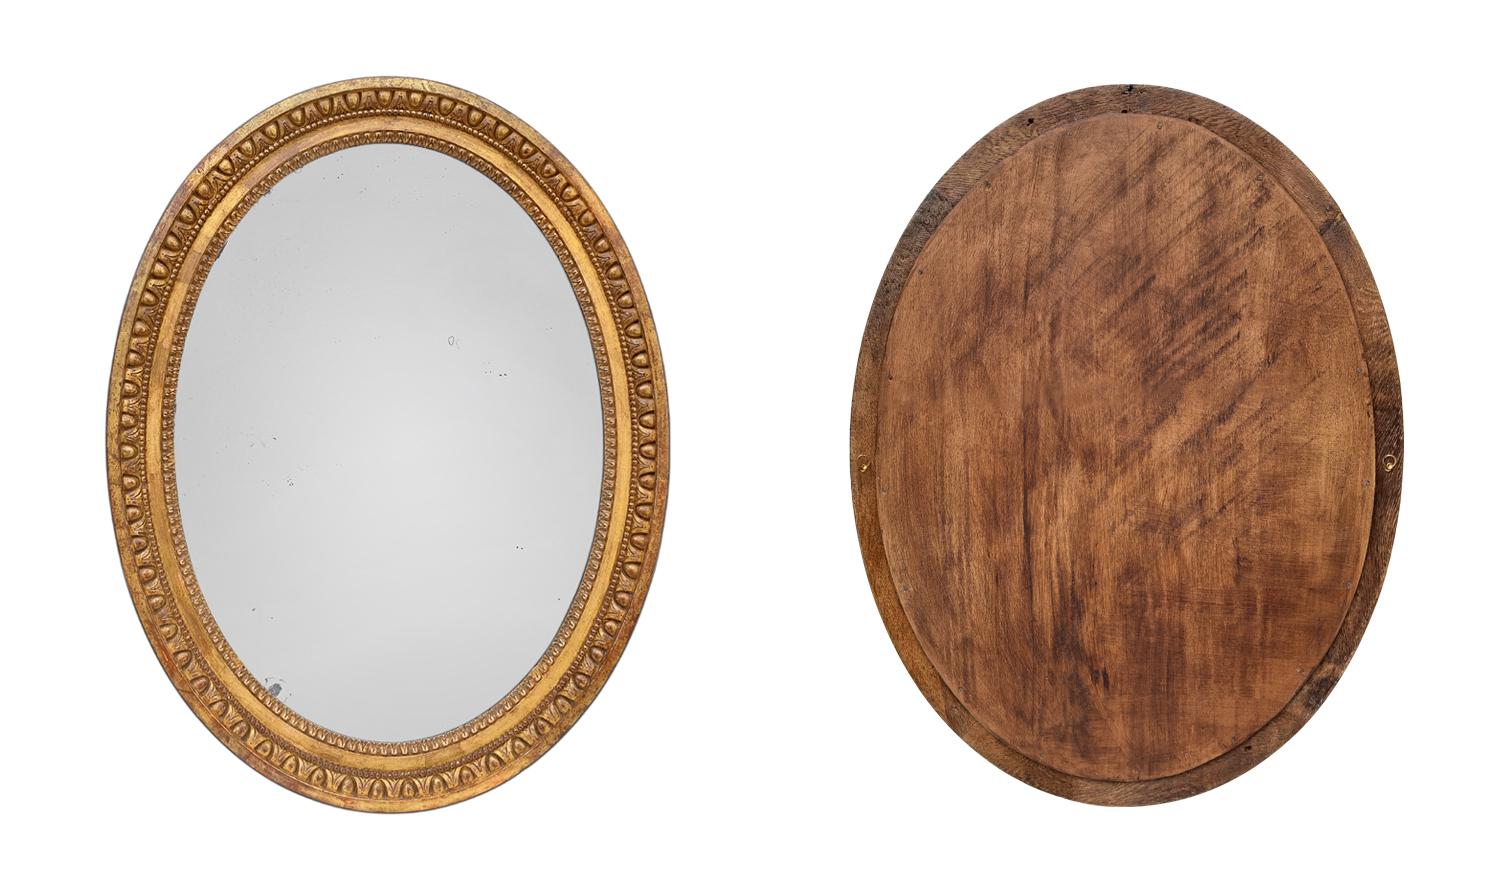 Antique French Giltwood Oval Mirror, Louis XVI Period, circa 1780 For Sale 1